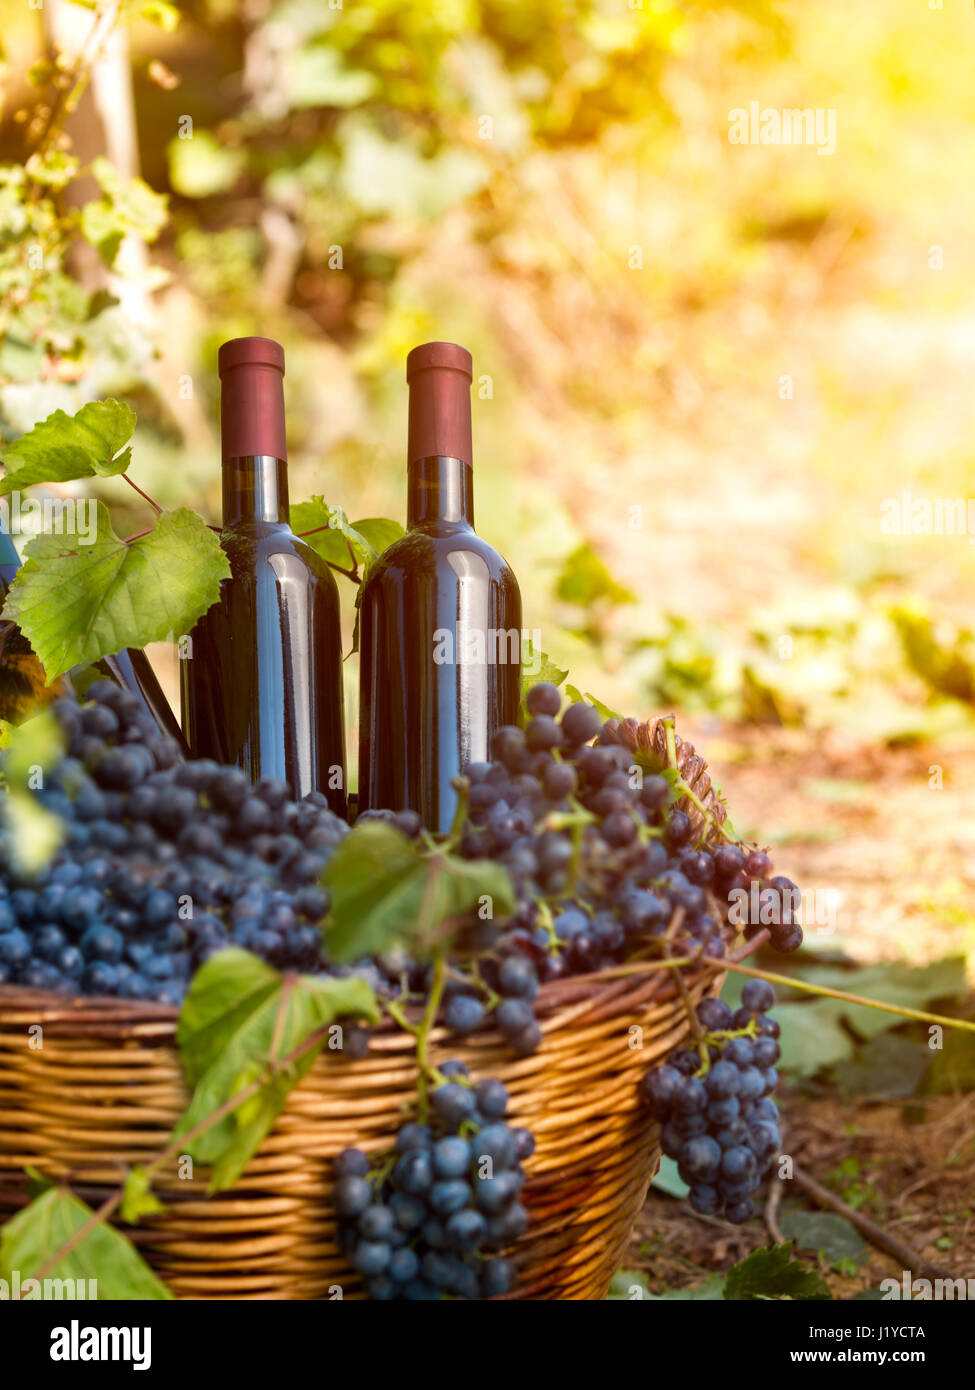 wine bottles with no label in vineyard Stock Photo